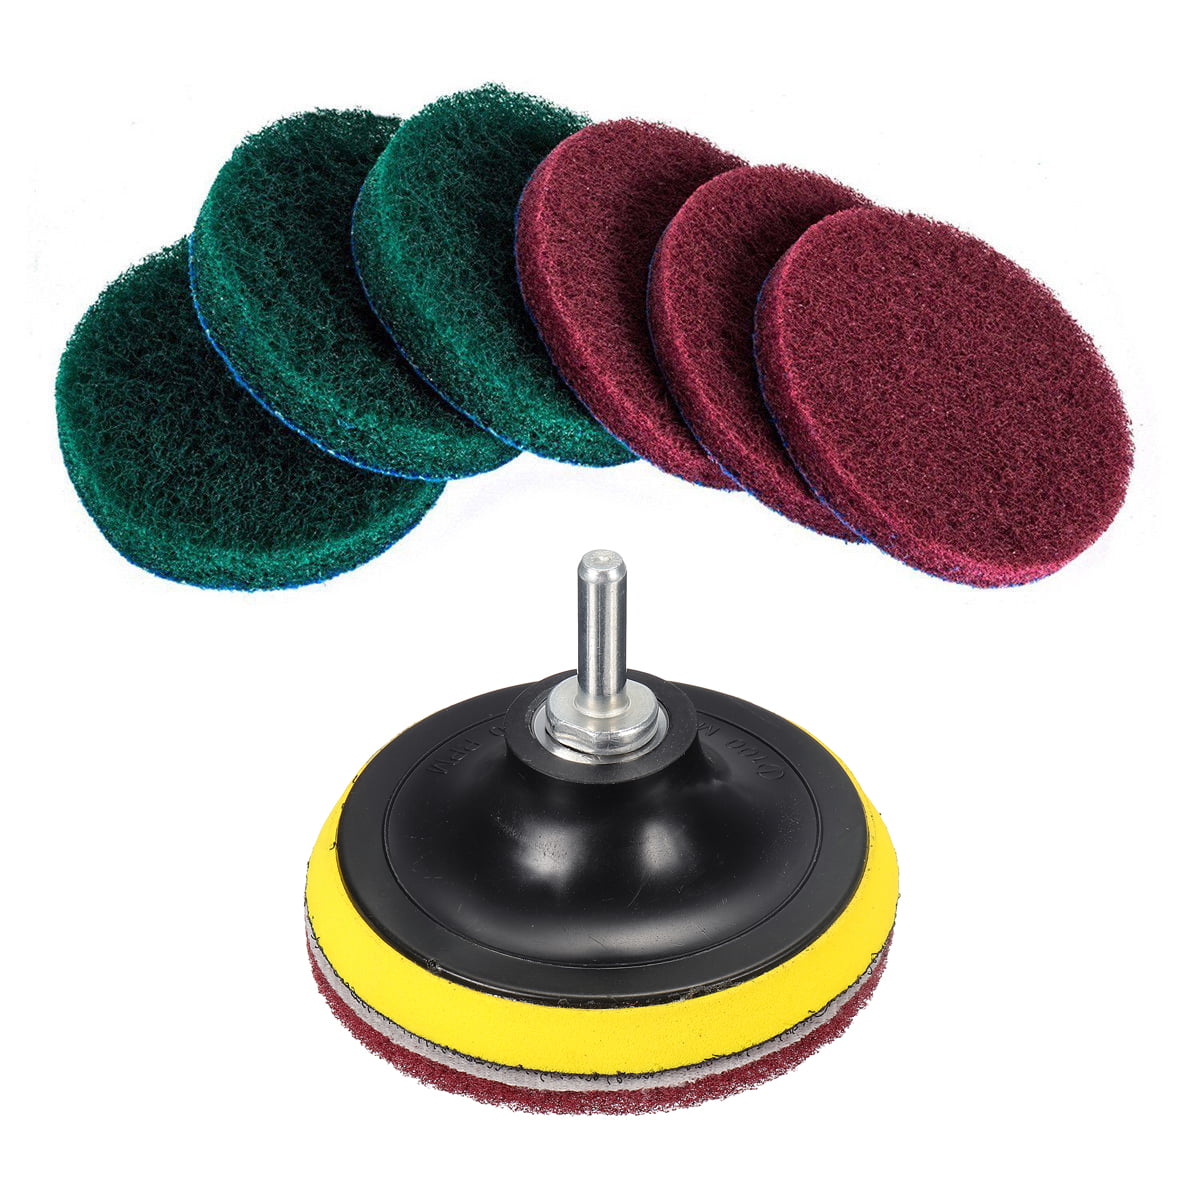 Utoolmart 5inch Replacement Scrubbing Pads 240 Grit Disc Flocking Round Drill Powered Brush Tile Scrubber Hook and Loop Industrial for Kitchen Bathroom Auto Cleaning Tool Green 2pcs